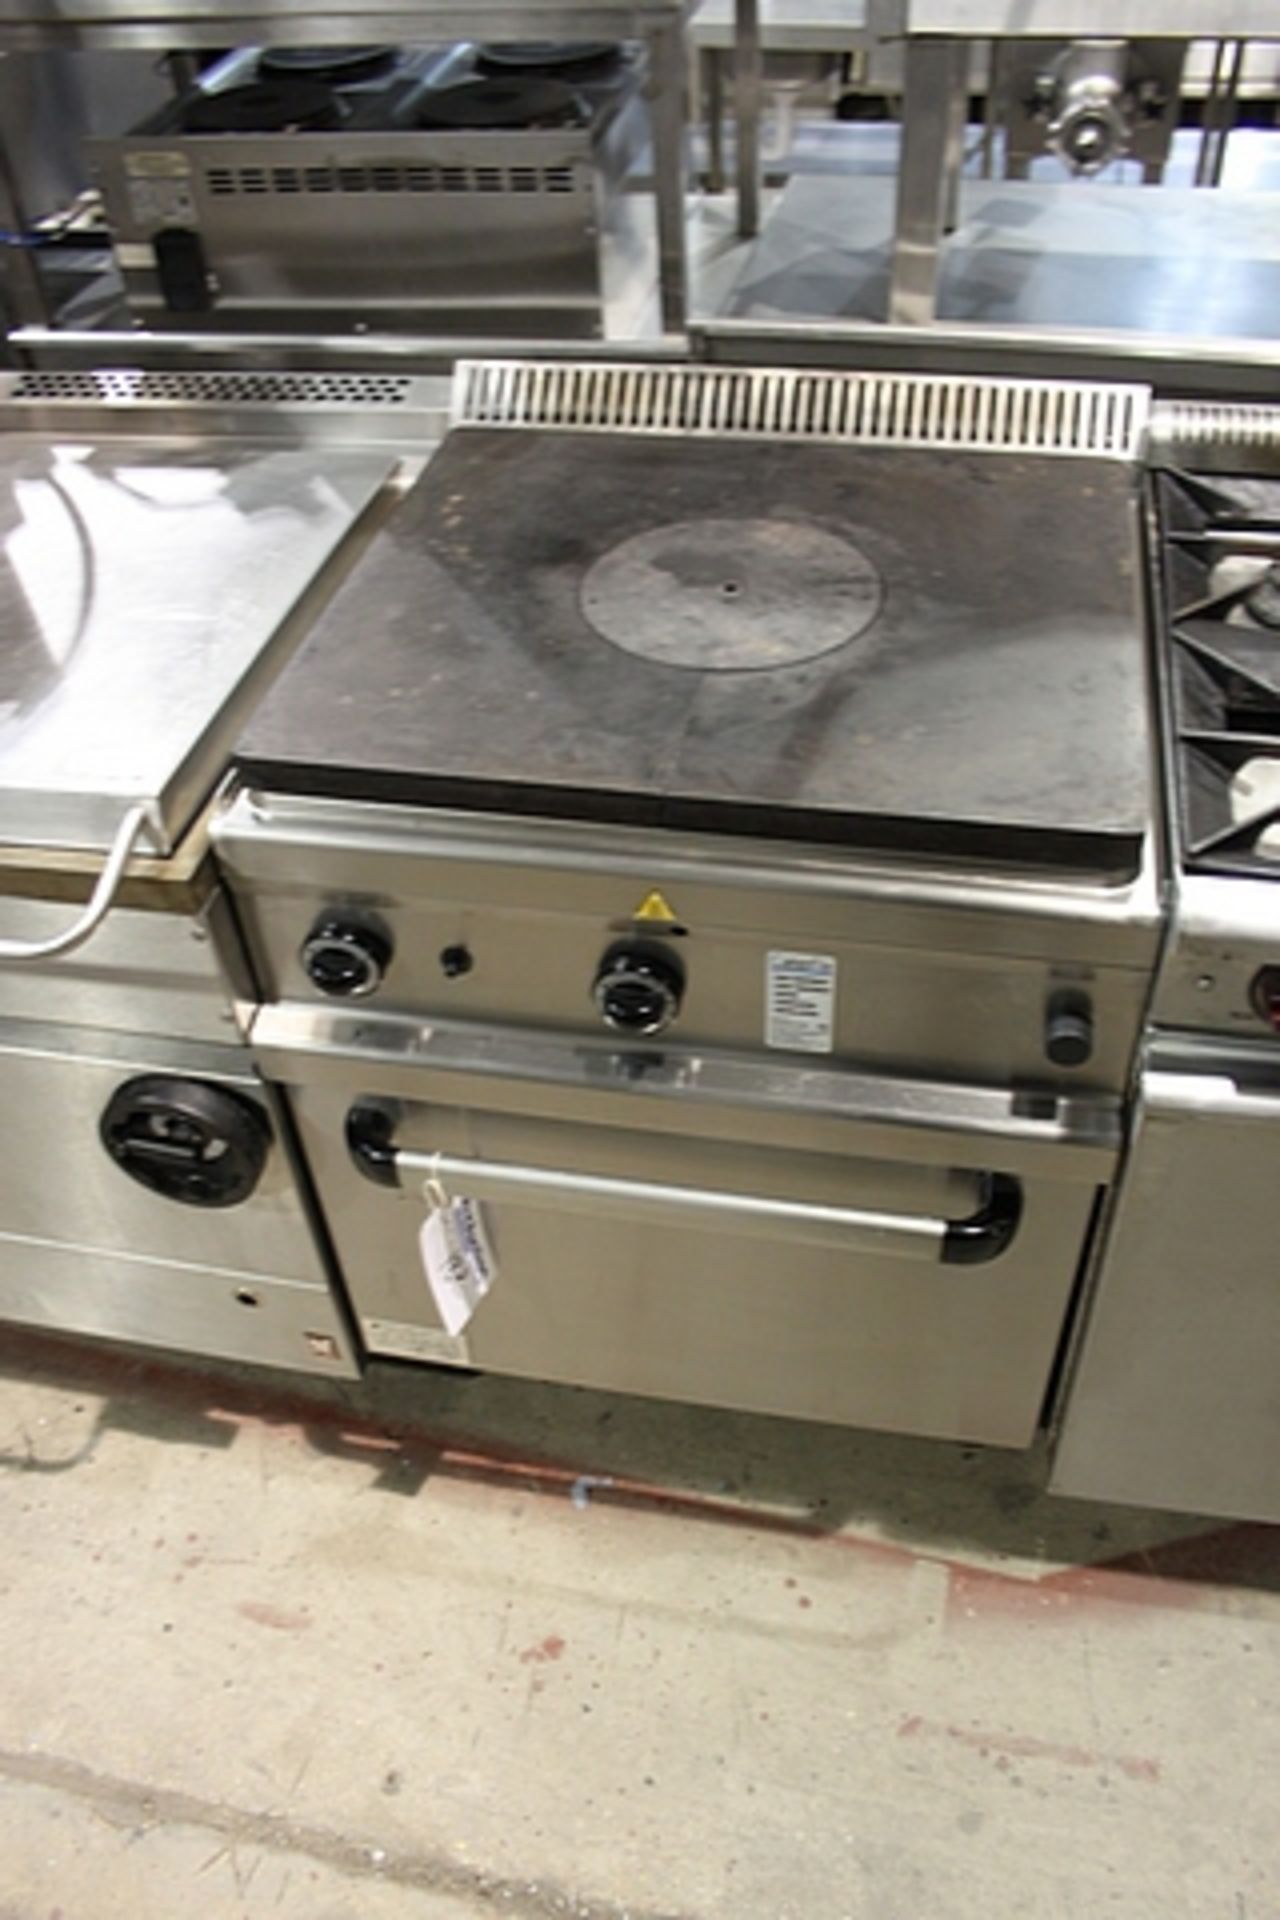 MBM GTF77 solid top boiling table with gas oven 9kW burner power 6kW oven power maximum